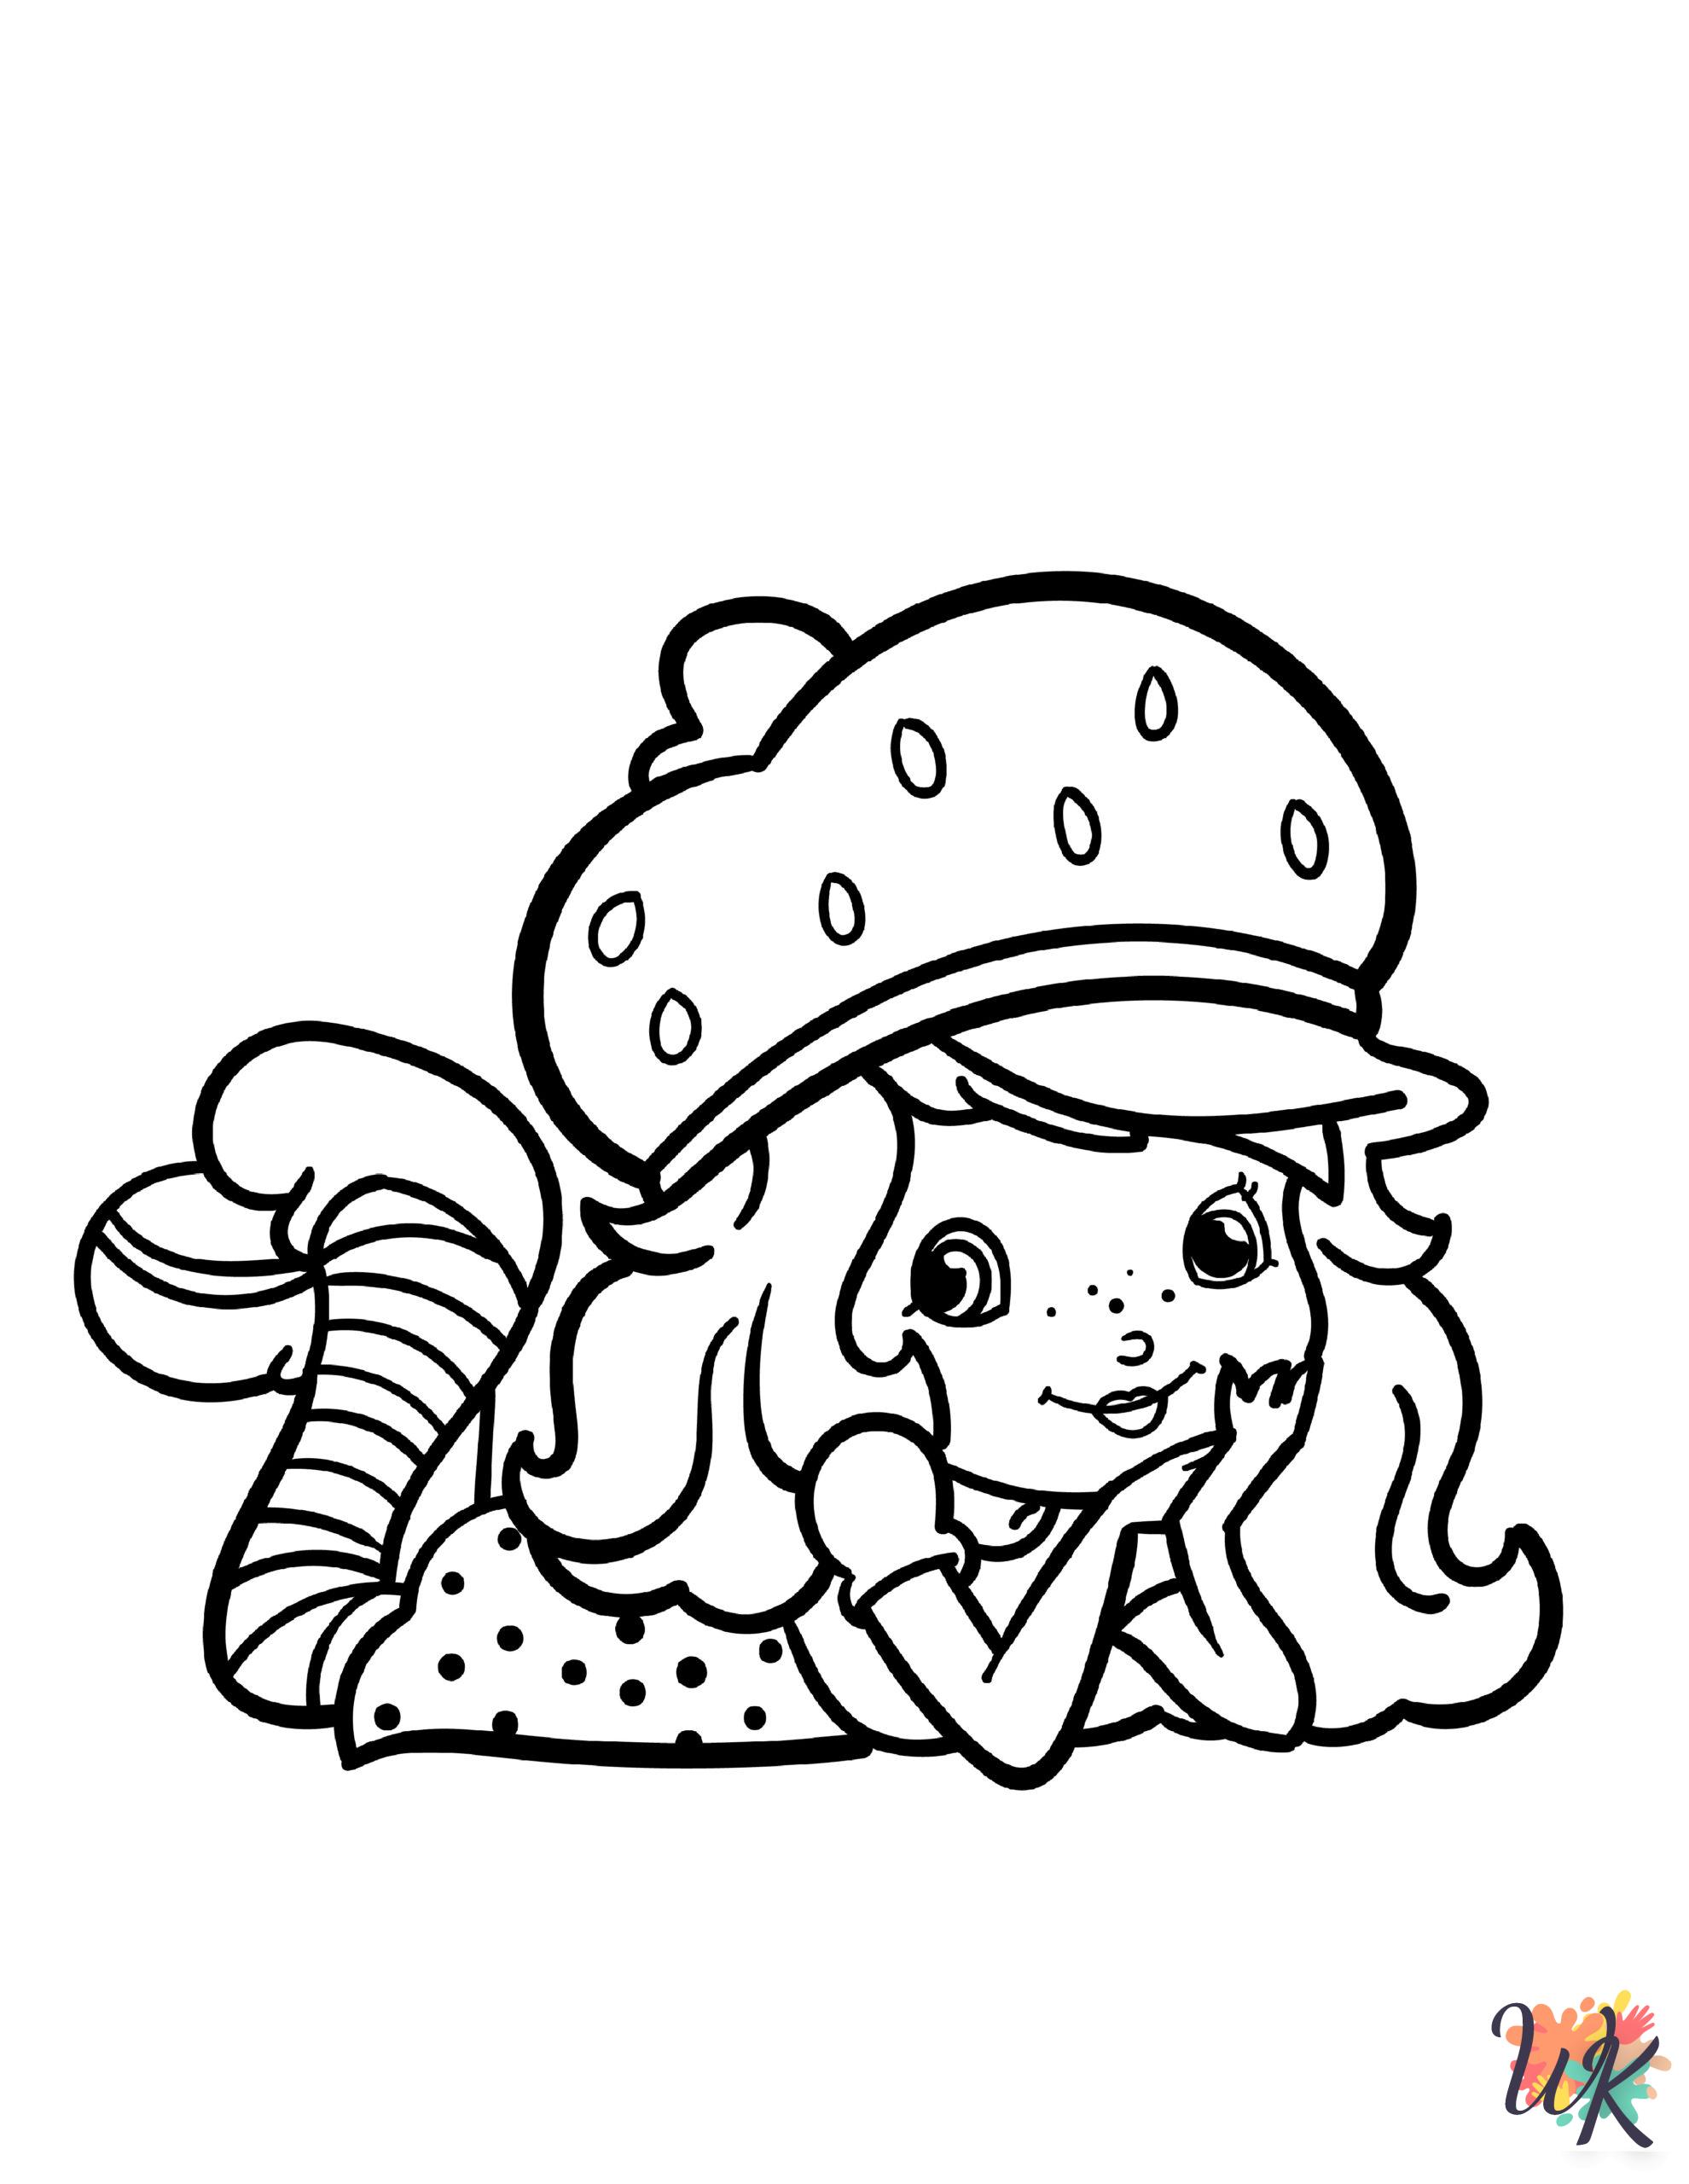 Strawberry Shortcake coloring pages pdf